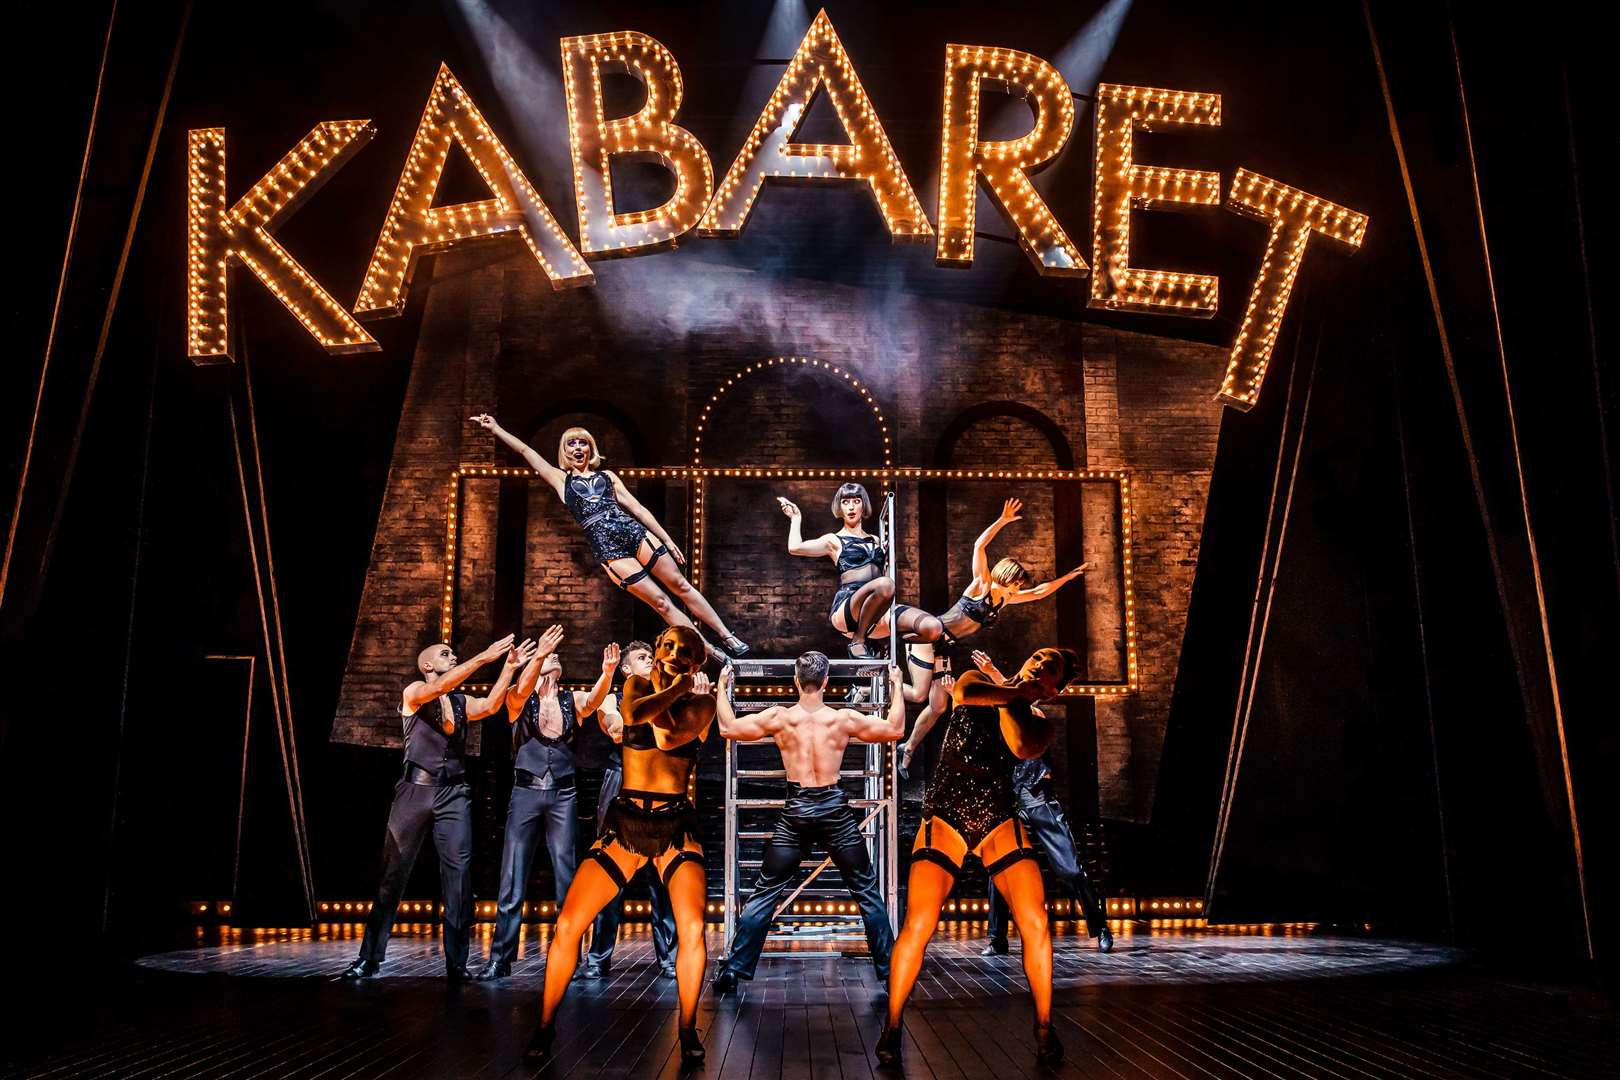 Cabaret stunned audiences at Marlowe Theatre